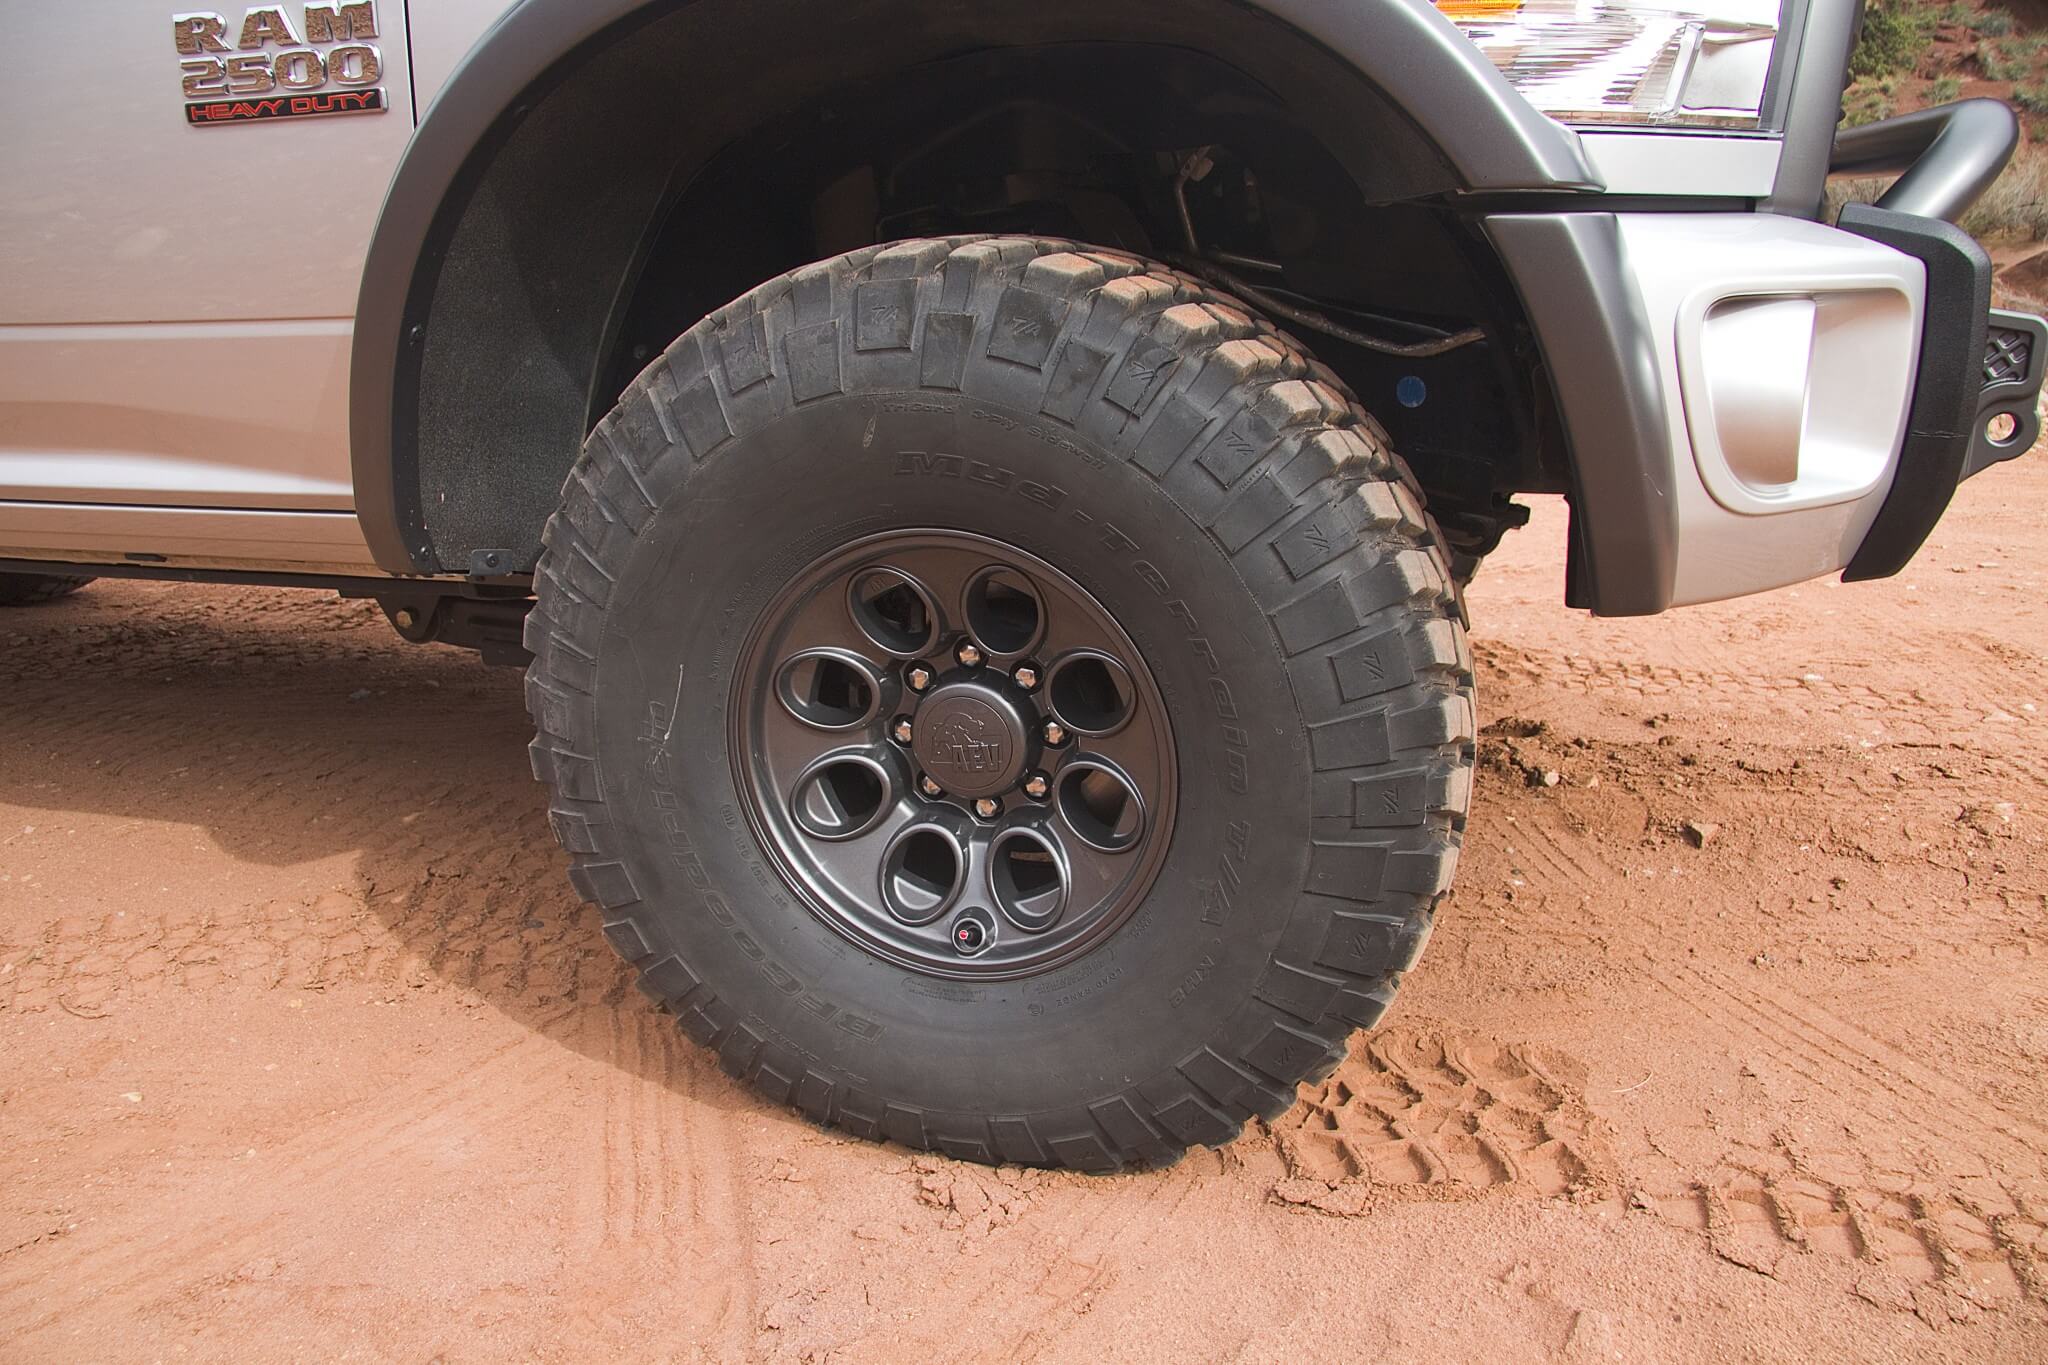 The AEV ram has two tire options, 37- and 40-in. Seen here is the 40x14.50R17BFGoodrich Mud-Terrain T/A KM2 40x14.50R17 tire option. Mounted on the AEV wheel, these load range C tires ride great on pavement and trail, and work well in the rough. This huge tire looks stock thanks to the AEV suspension package. 